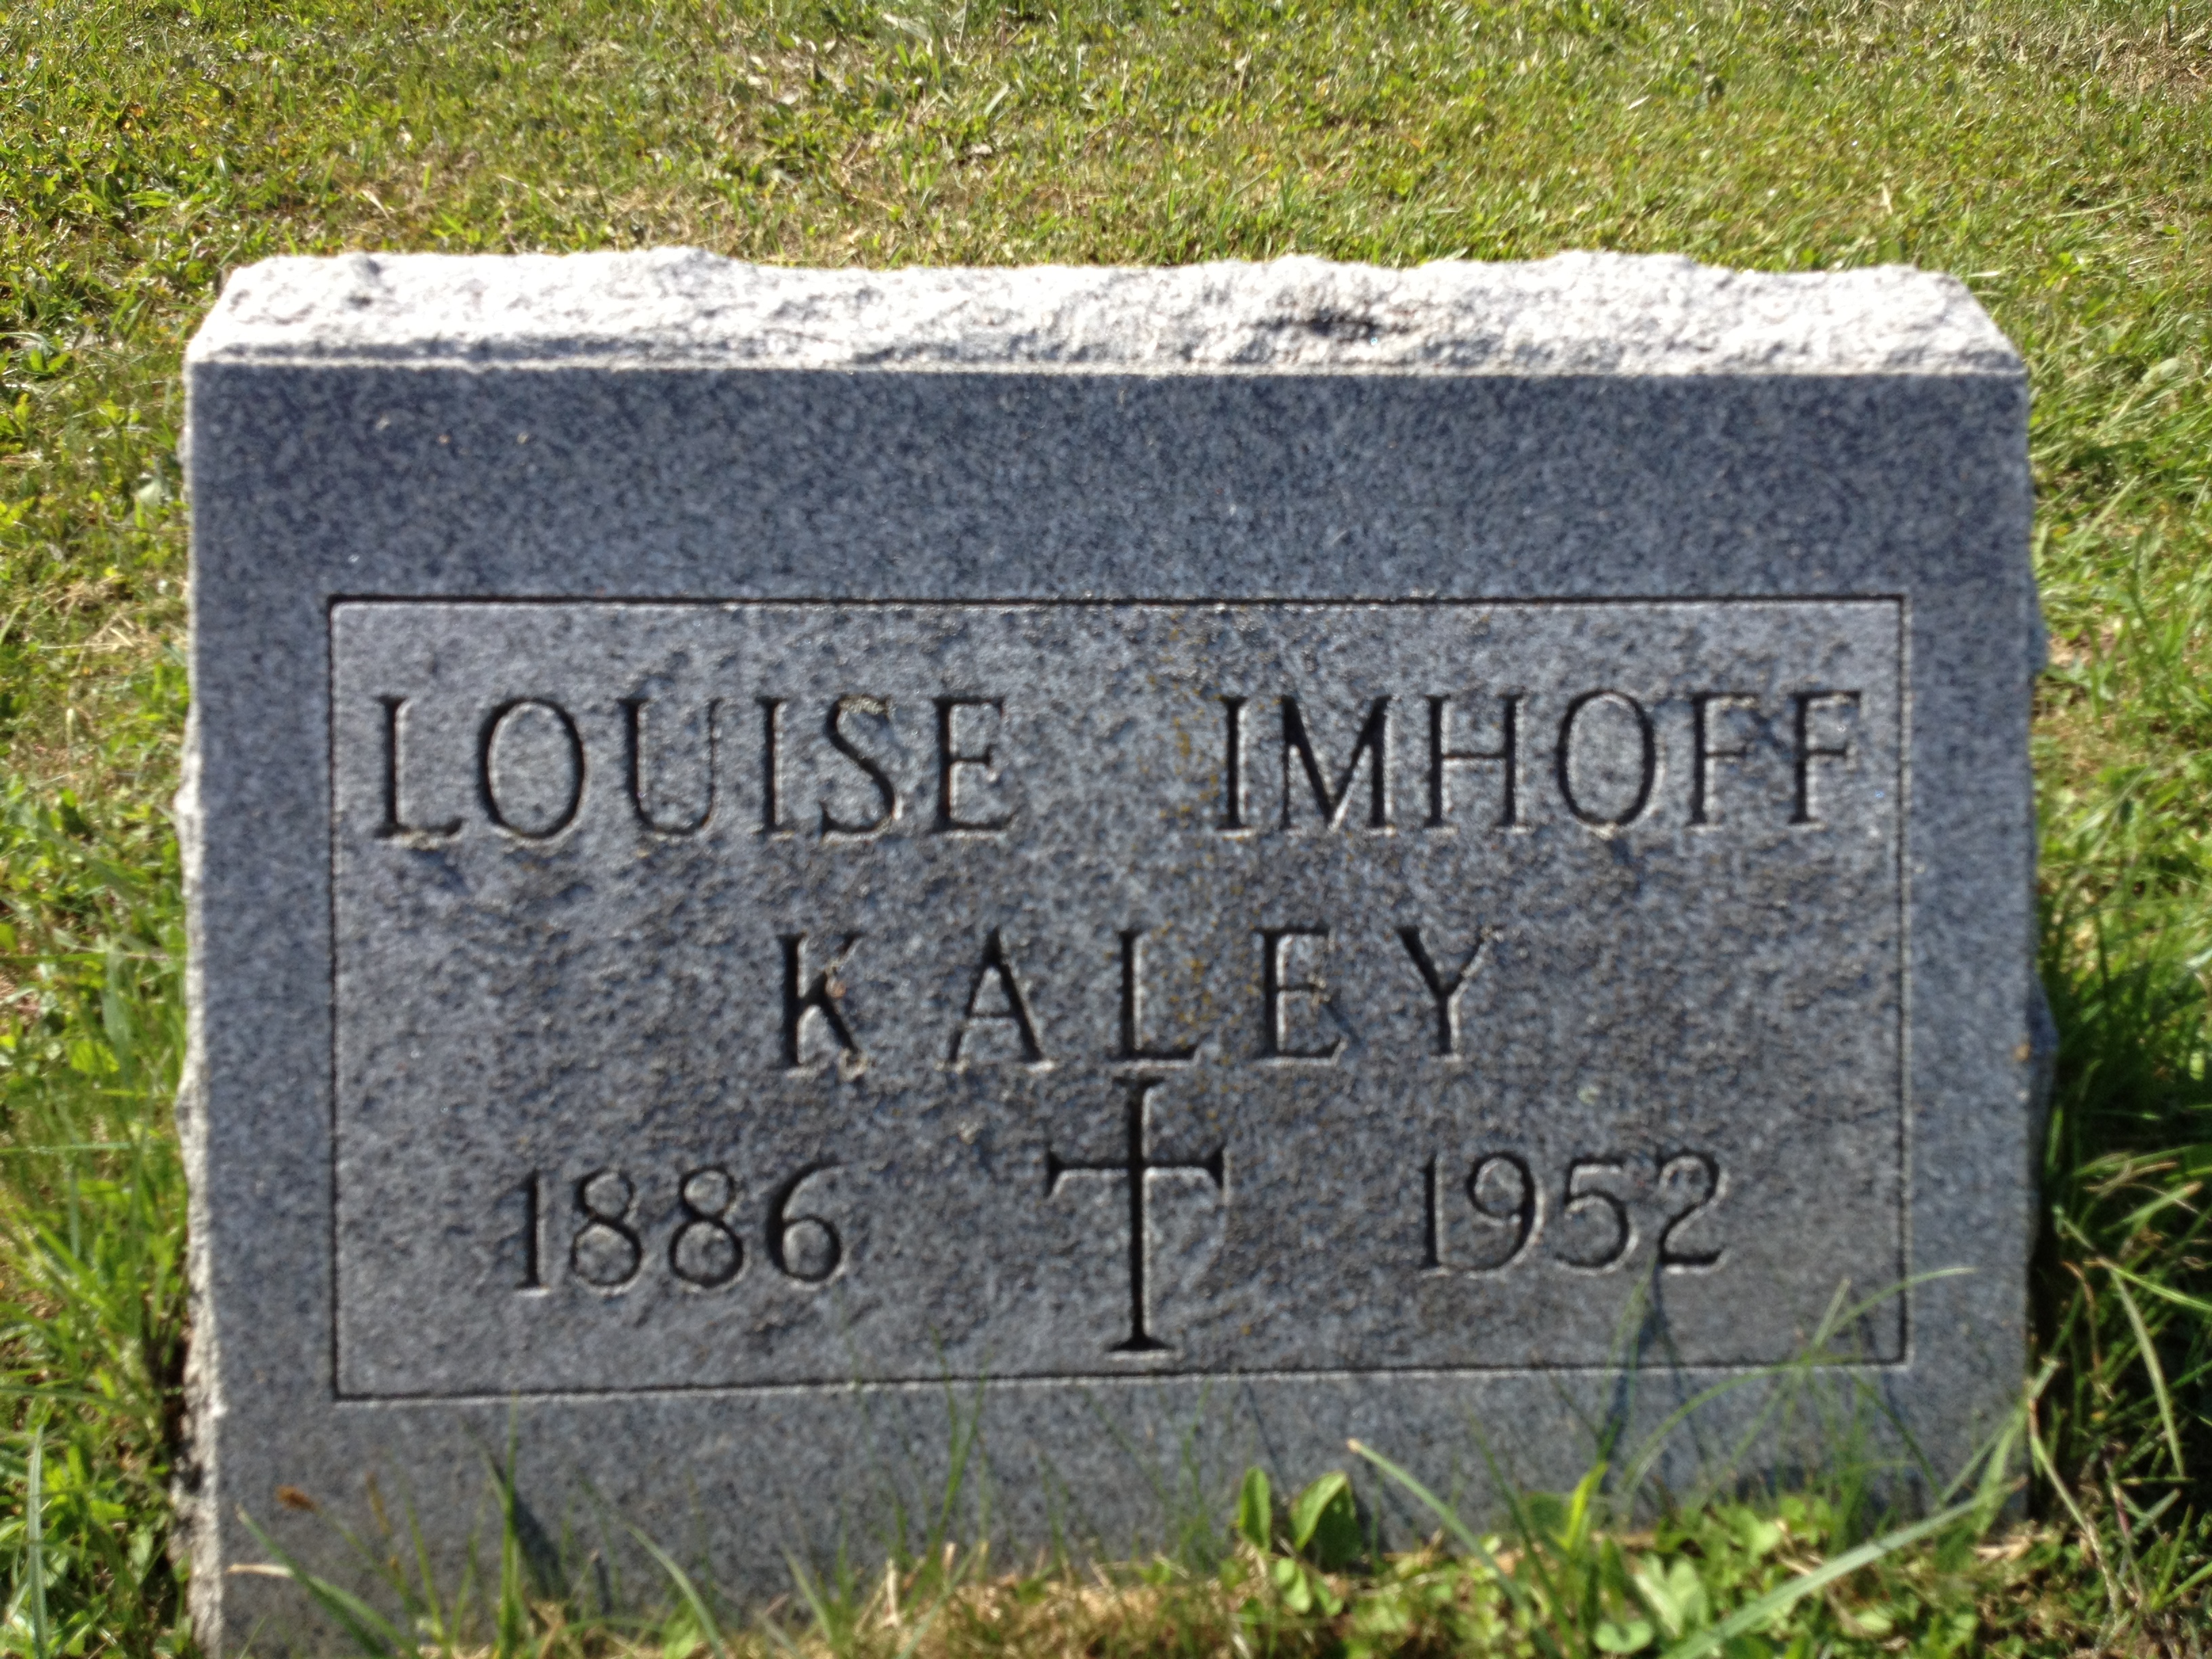 Headstone of Louise Imhoff 